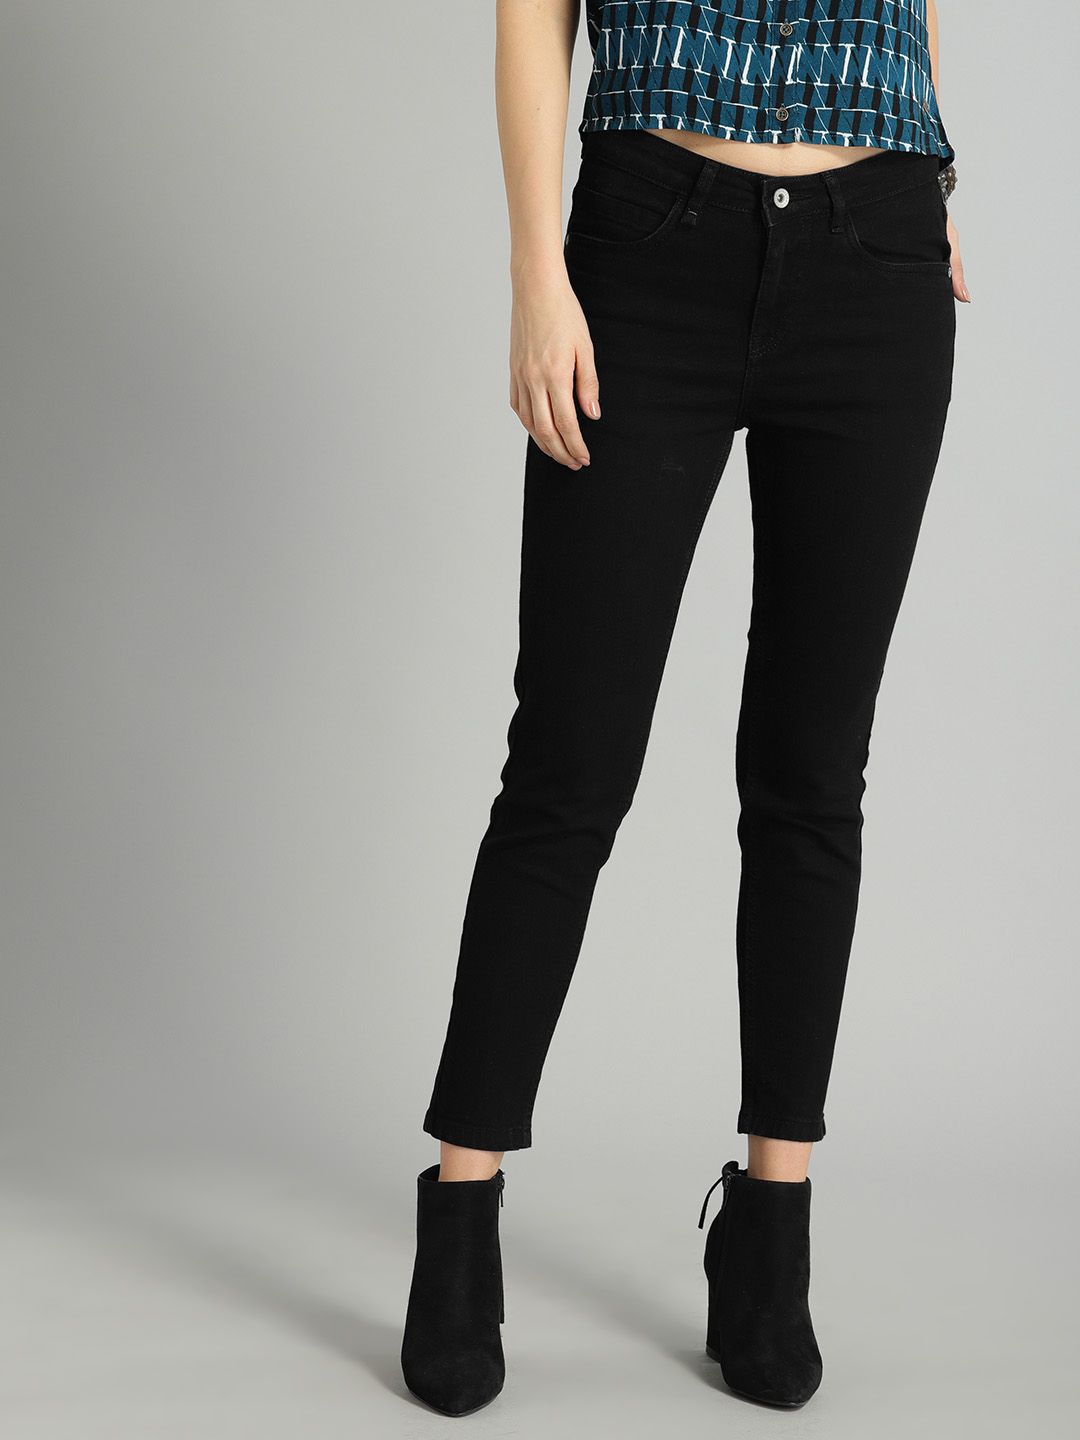 The Roadster Lifestyle Co Women Black Skinny Fit Mid-Rise Clean Look Stretchable Jeans Price in India